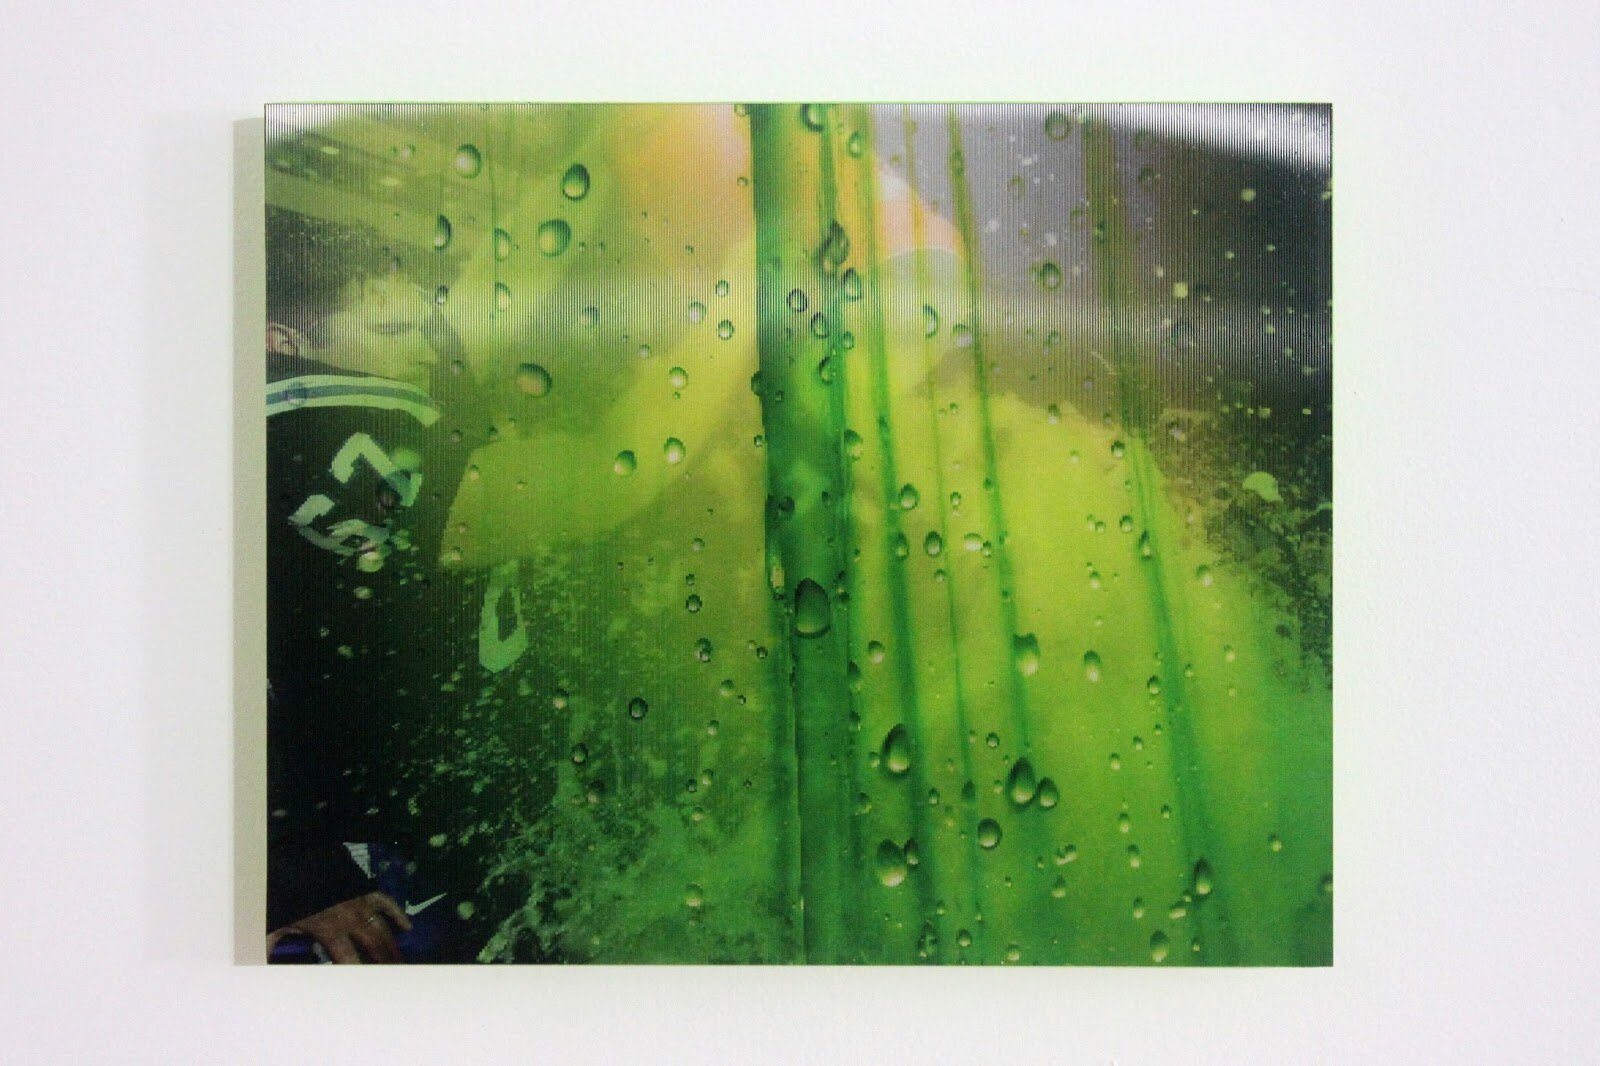   Thirst (Neon Green #9093)  (lenticular photograph mounted to acrylic) 2015 